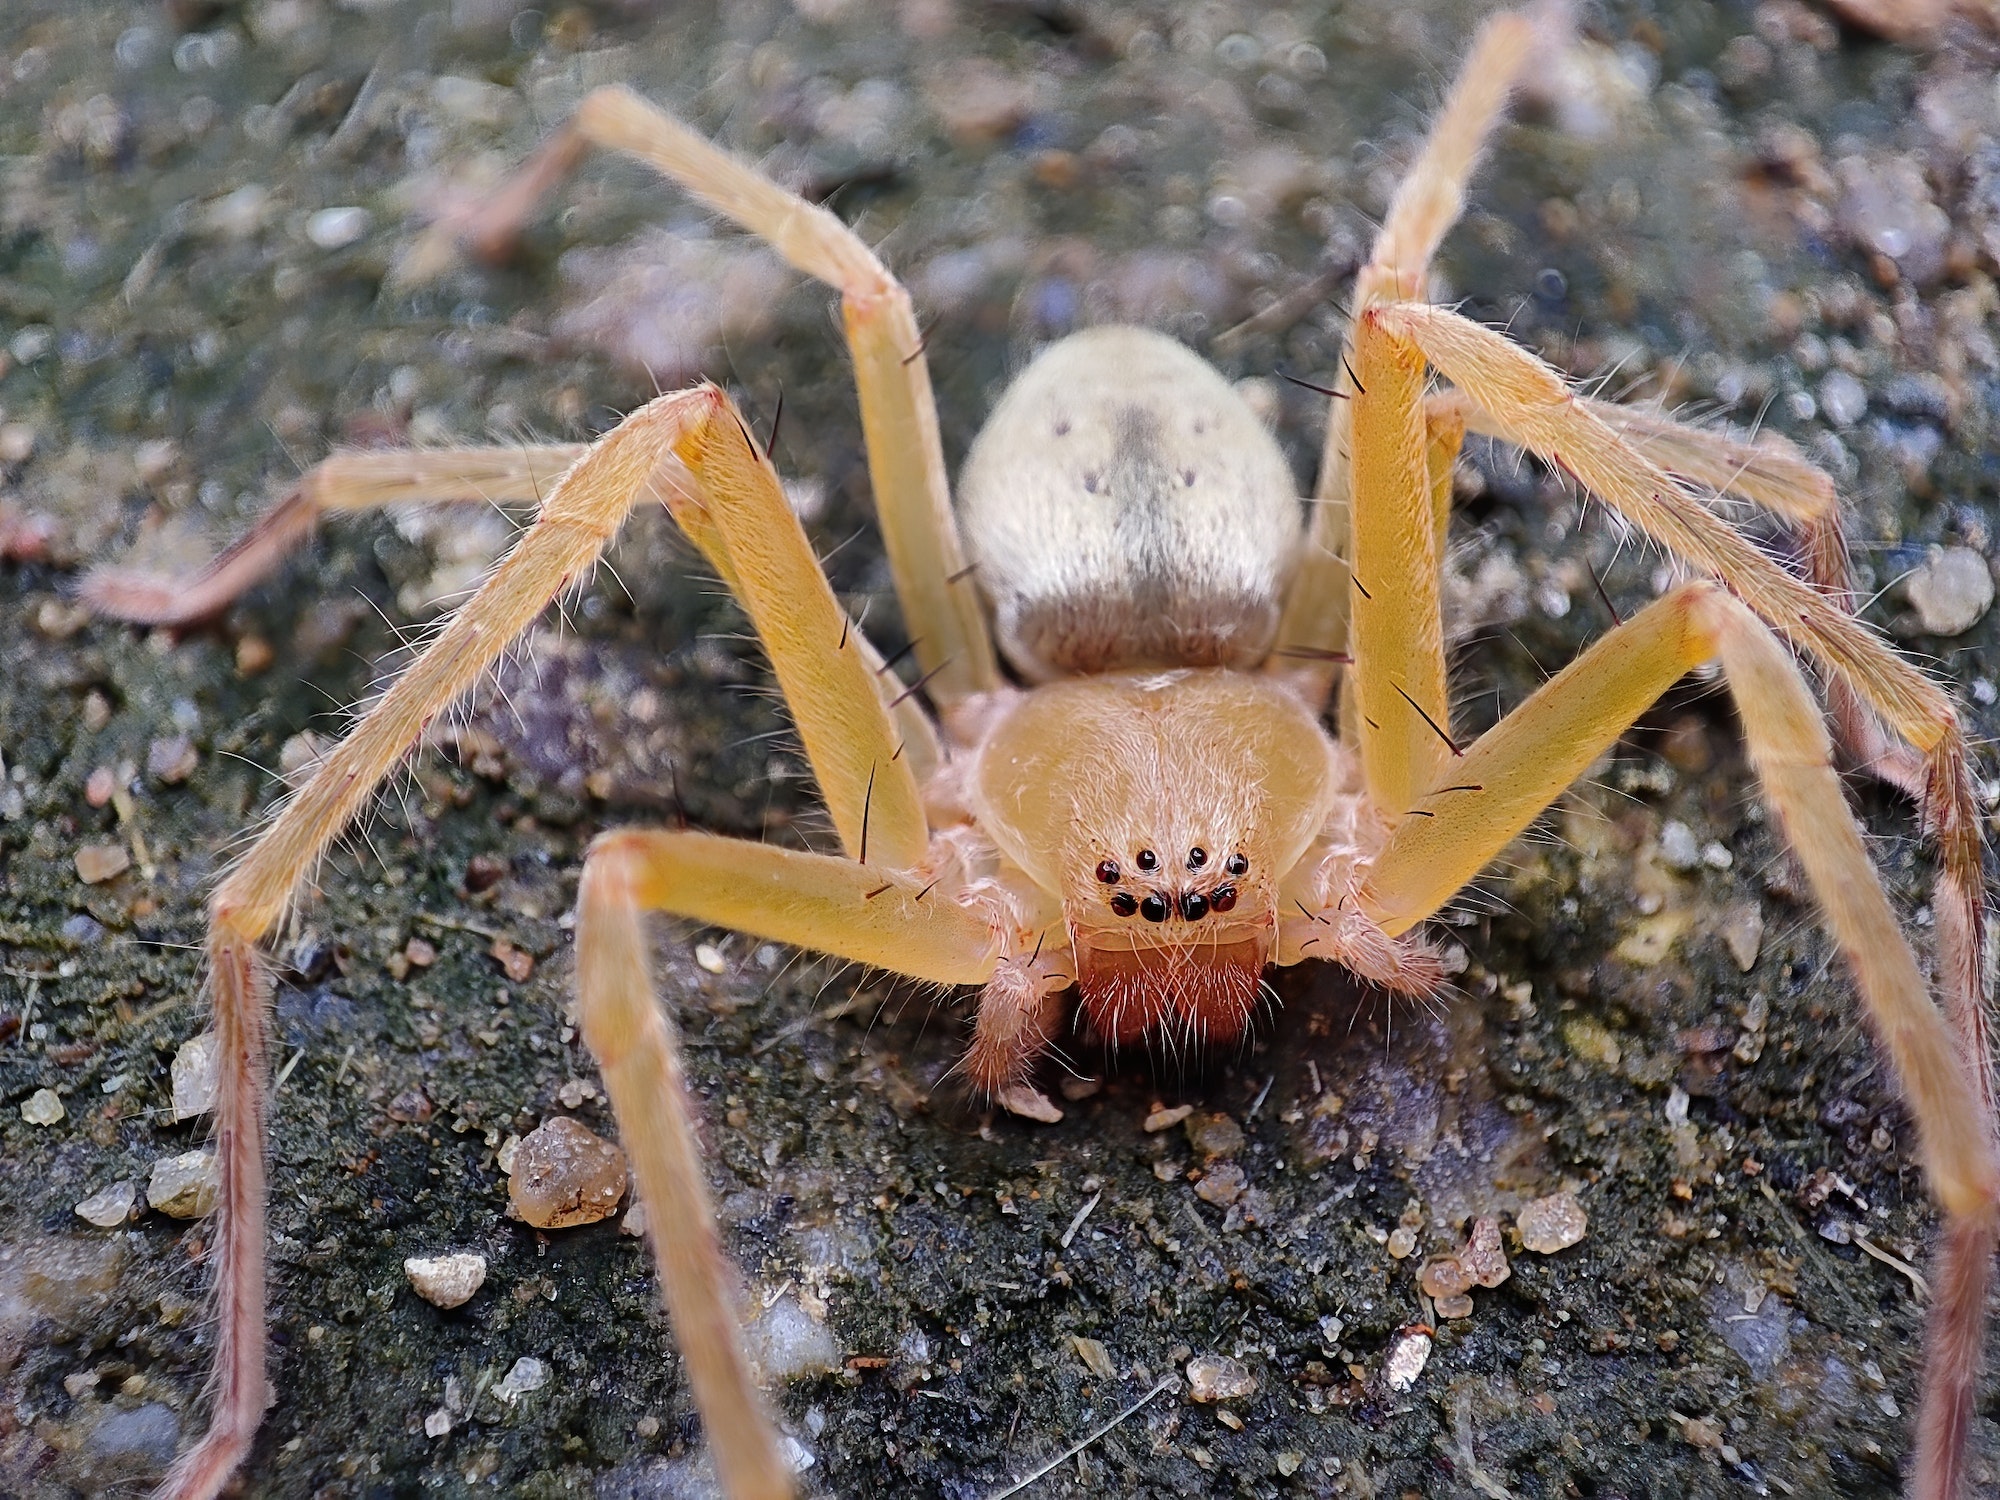 Closeup shot of a brown recluse spider on the soil